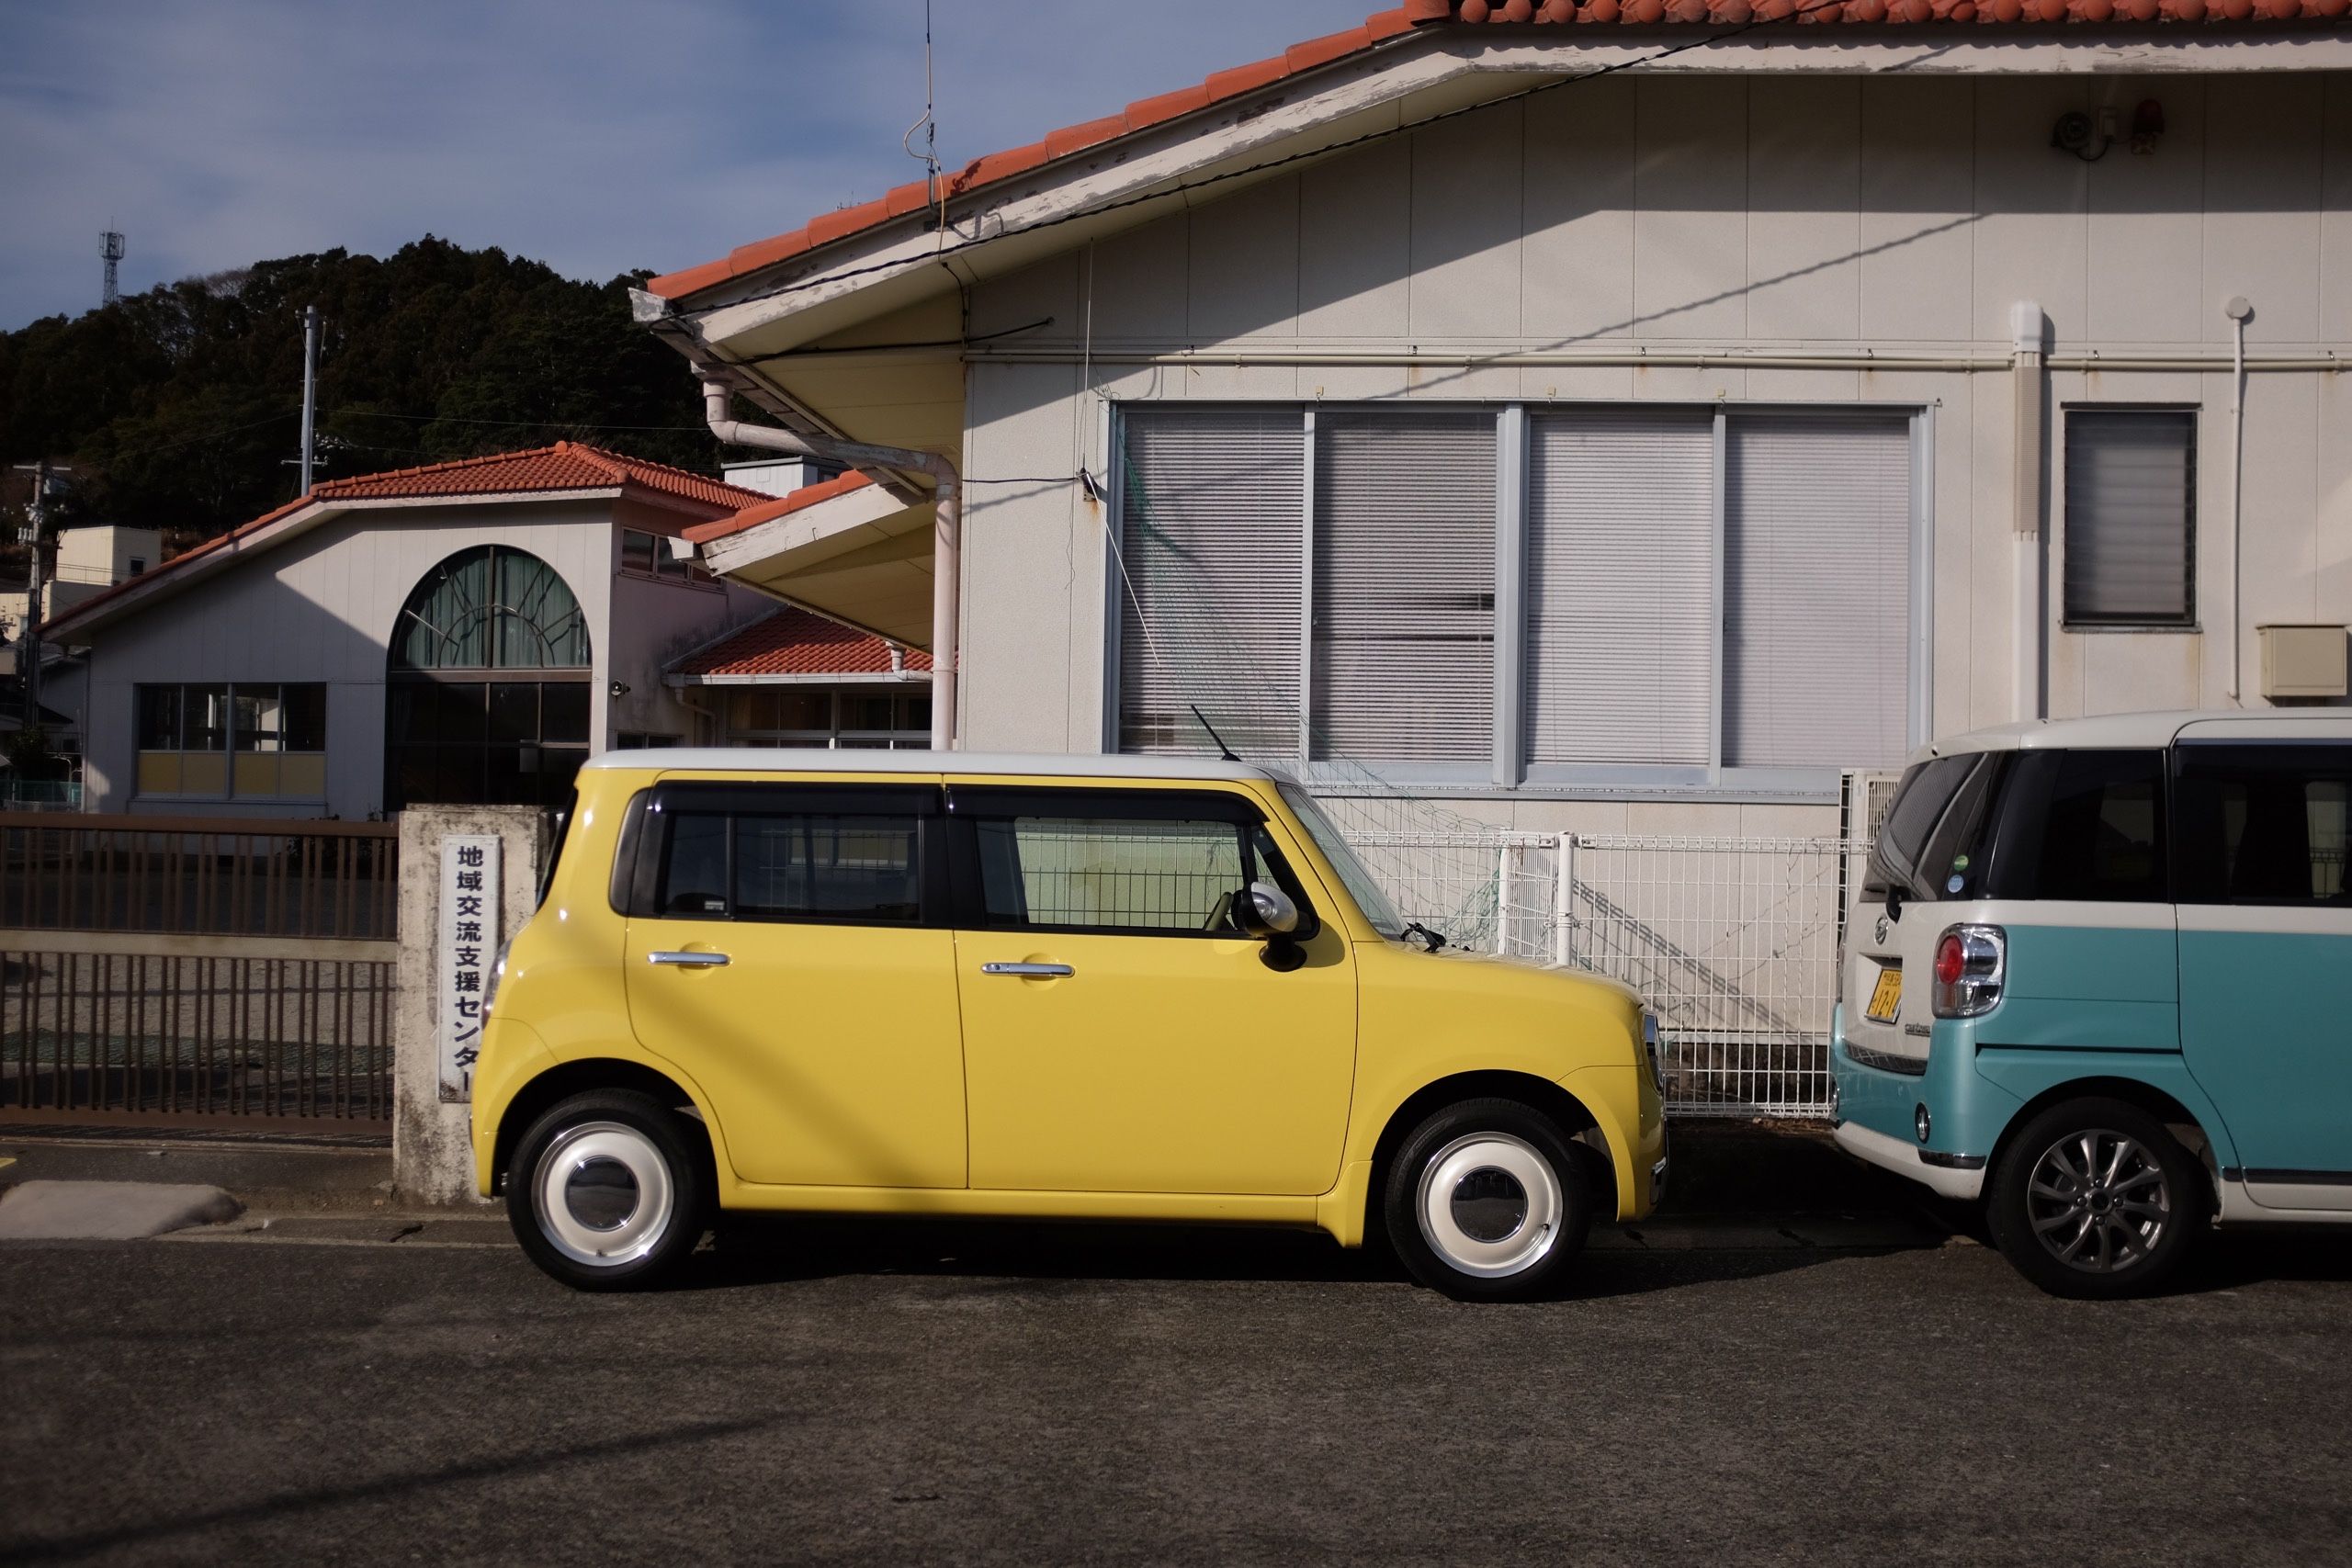 A small, yellow, boxy-looking car.